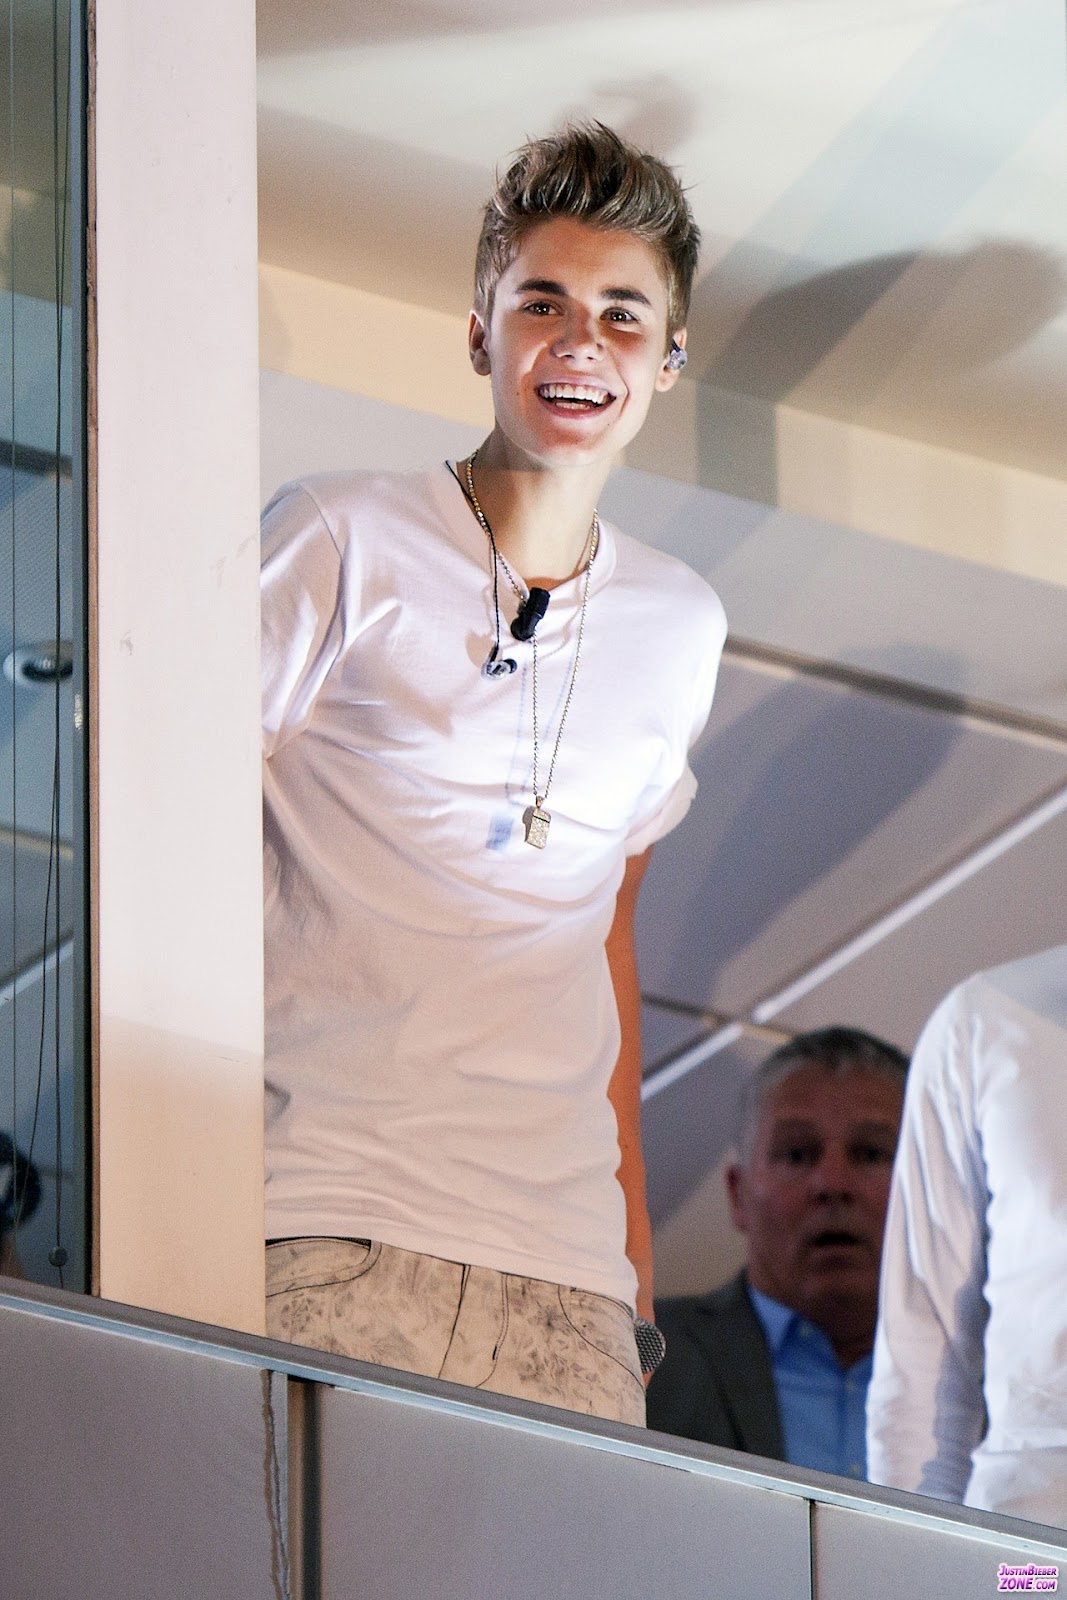 Bieber Exclusive: Justin Bieber Waving and Showing his Abs From Studio's Window.1067 x 1600